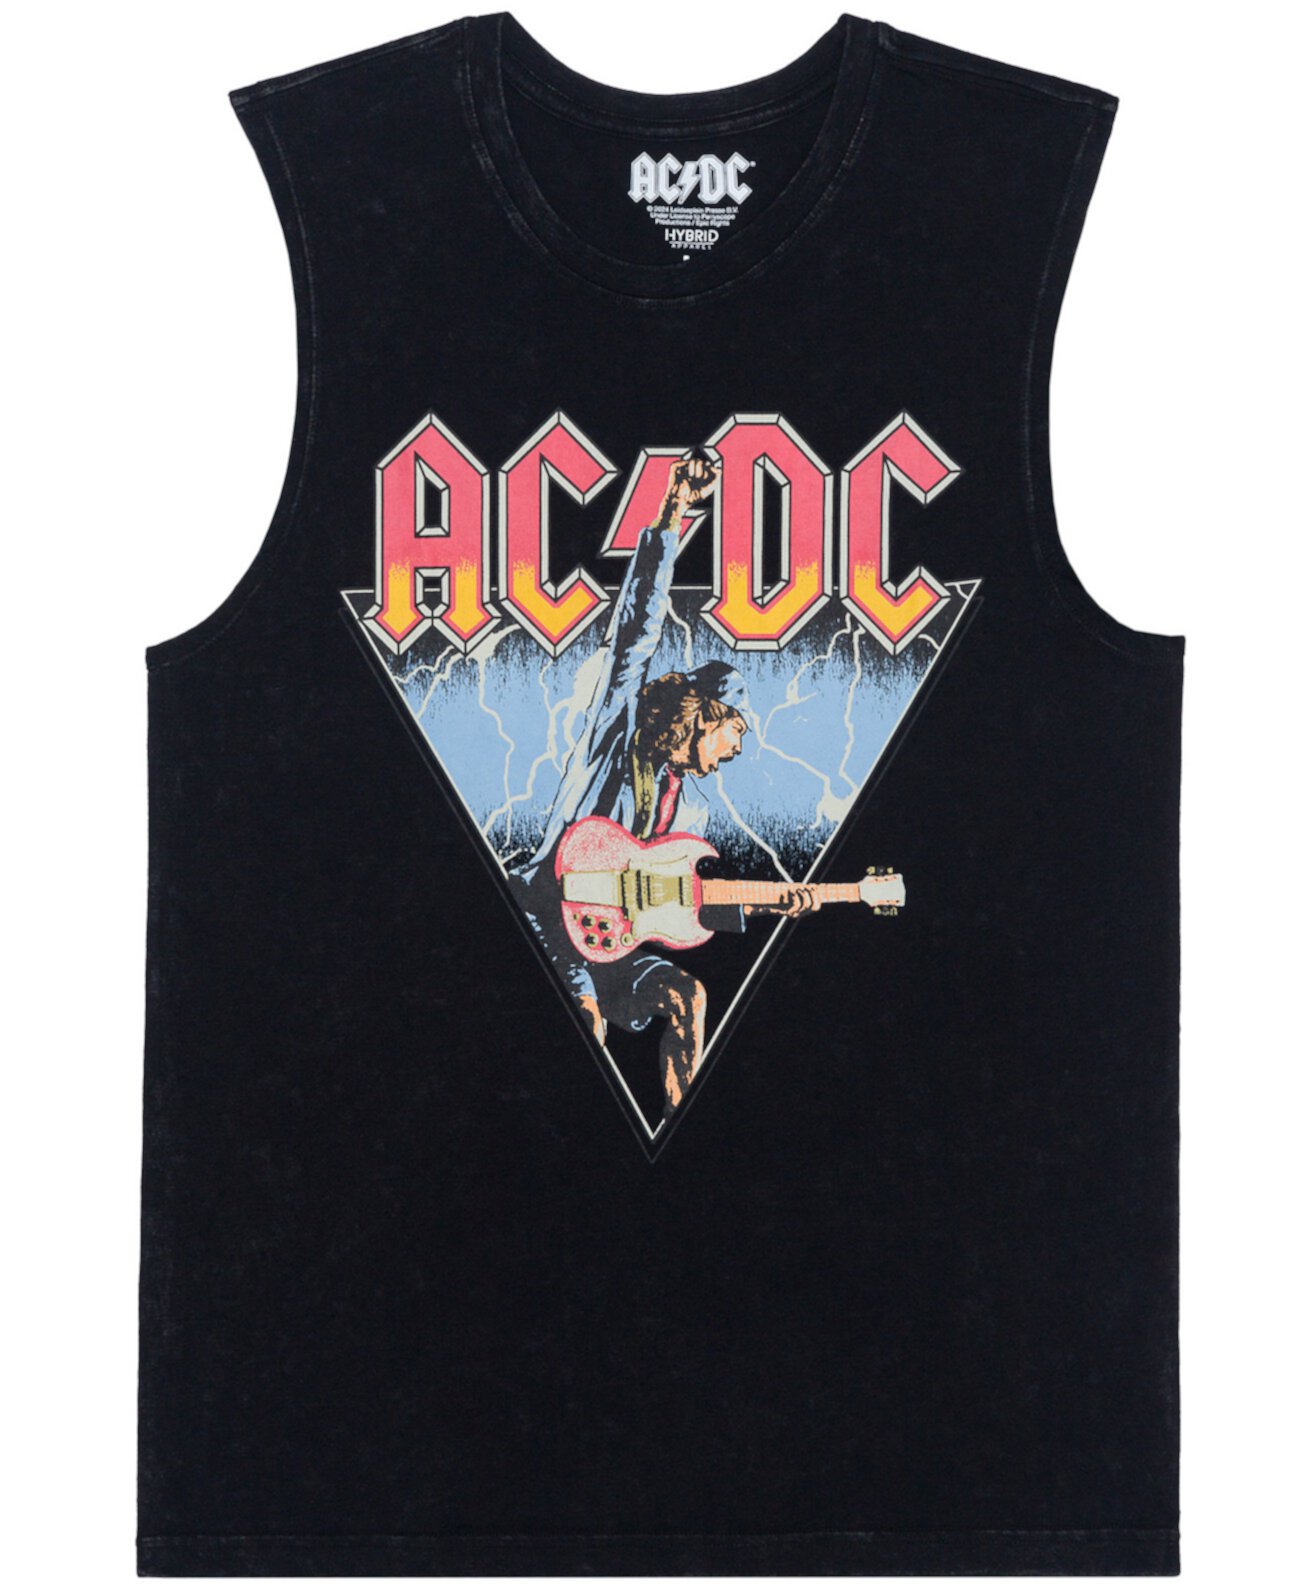 Men's Acdc Graphic Muscle Tank Top Hybrid